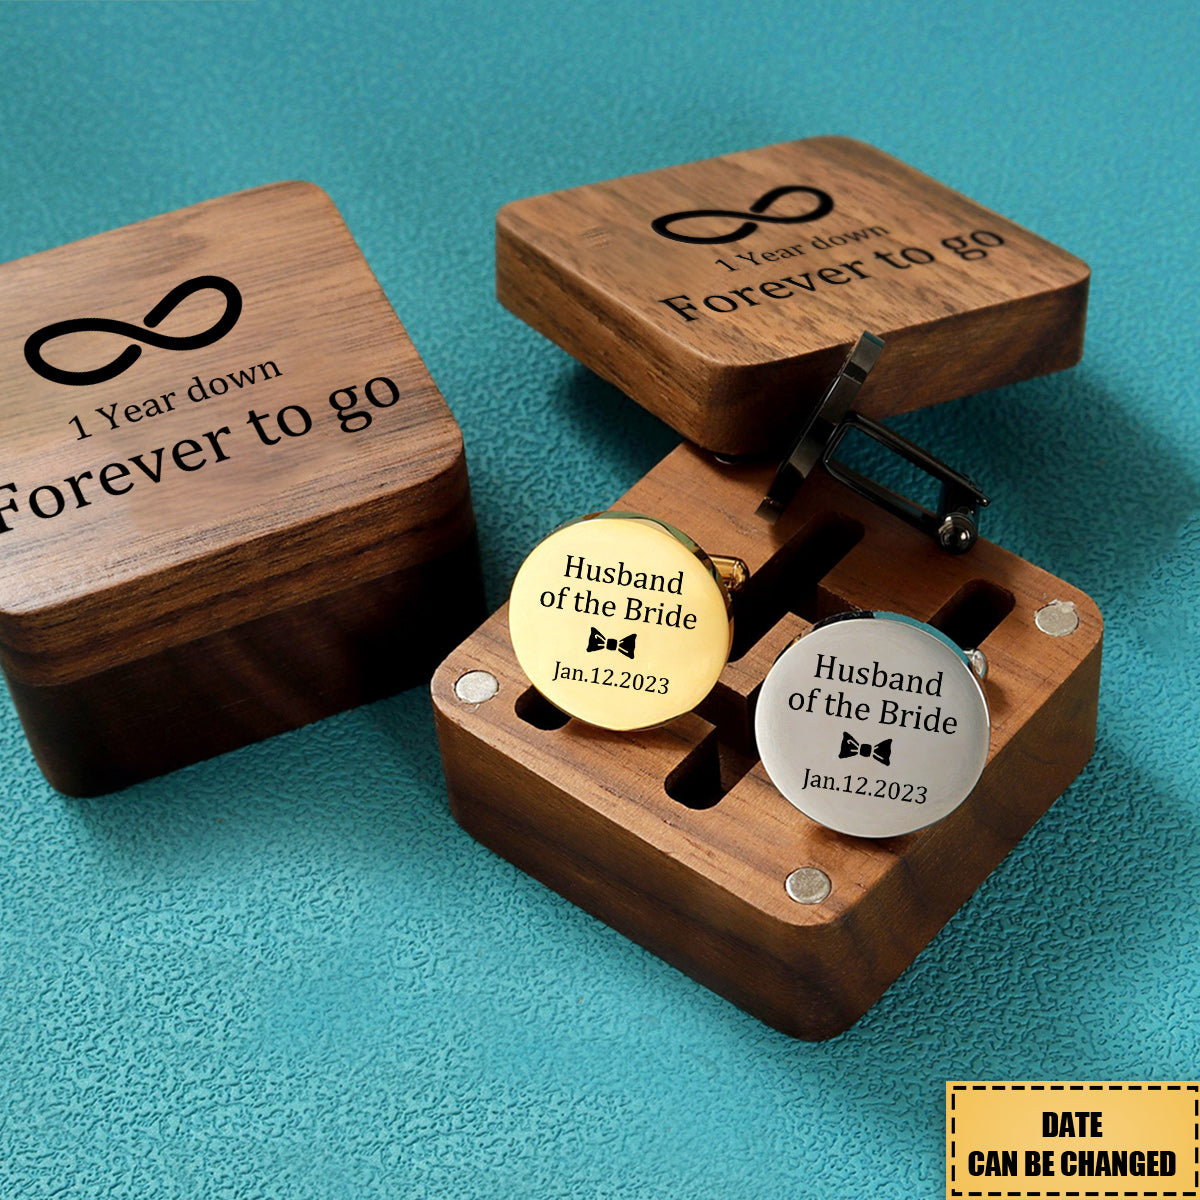 Years Down Forever To Go - Personalized Cufflinks - Gift for Him